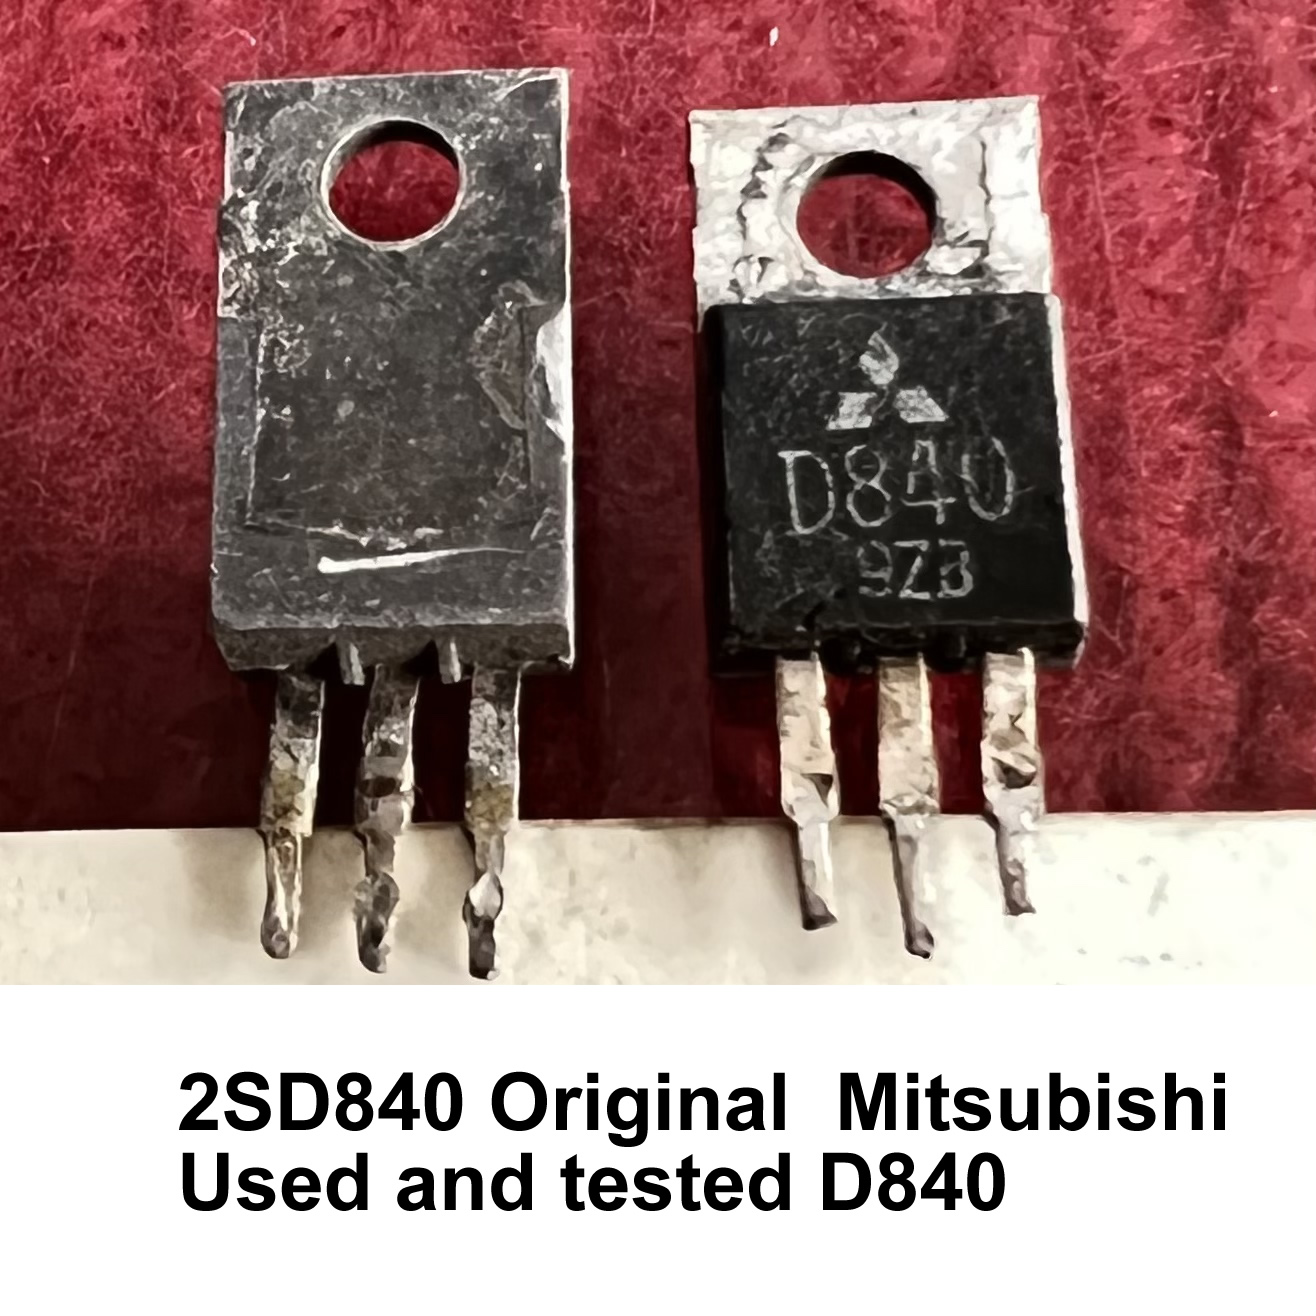 2SD840 Mitsubishi D840 Used and tested